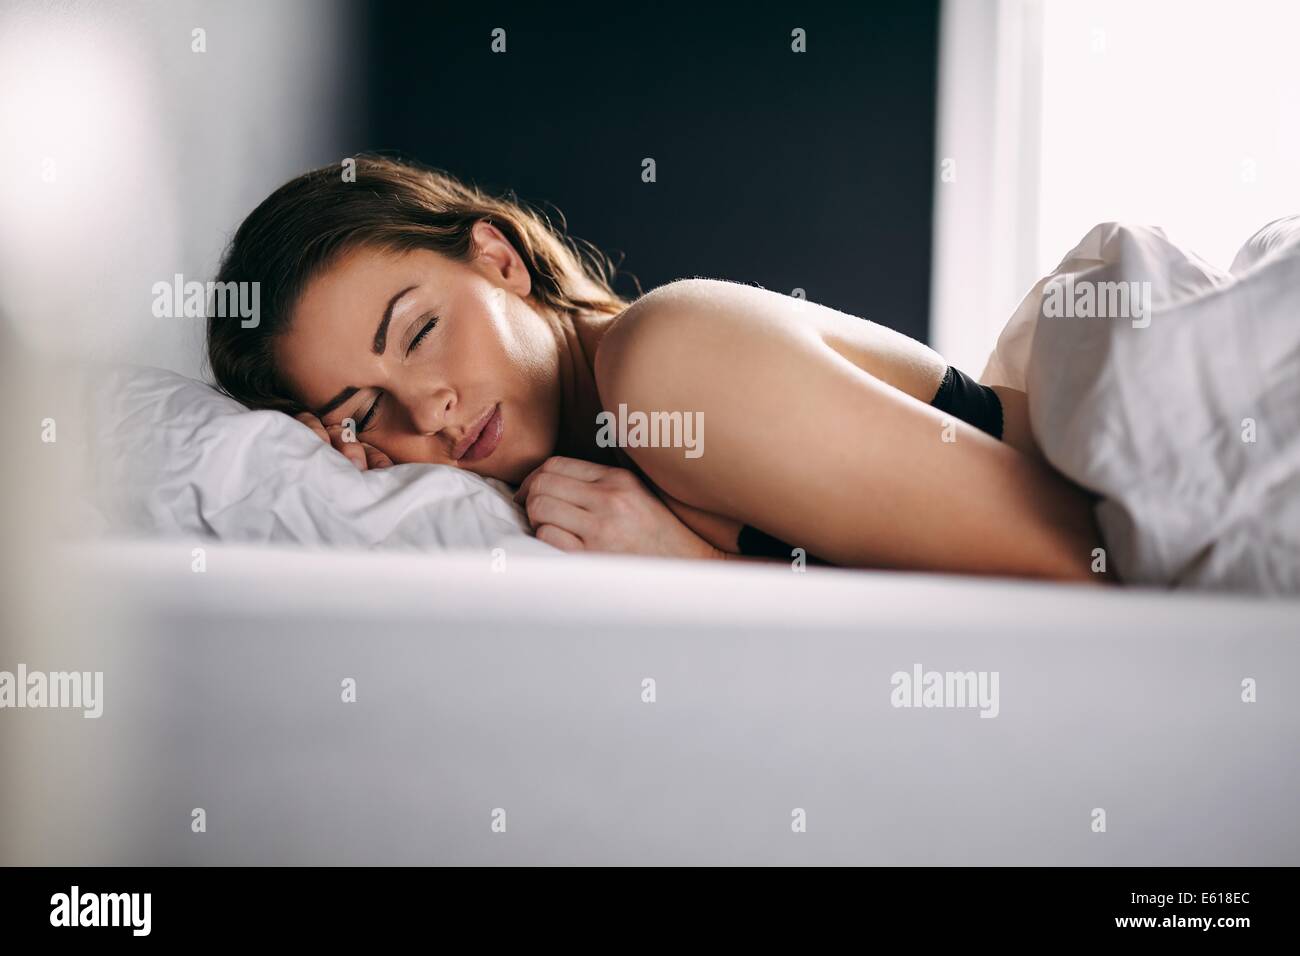 Portrait of relaxed young lady sleeping in her bed. Female model sleeping peacefully in her bed. Stock Photo